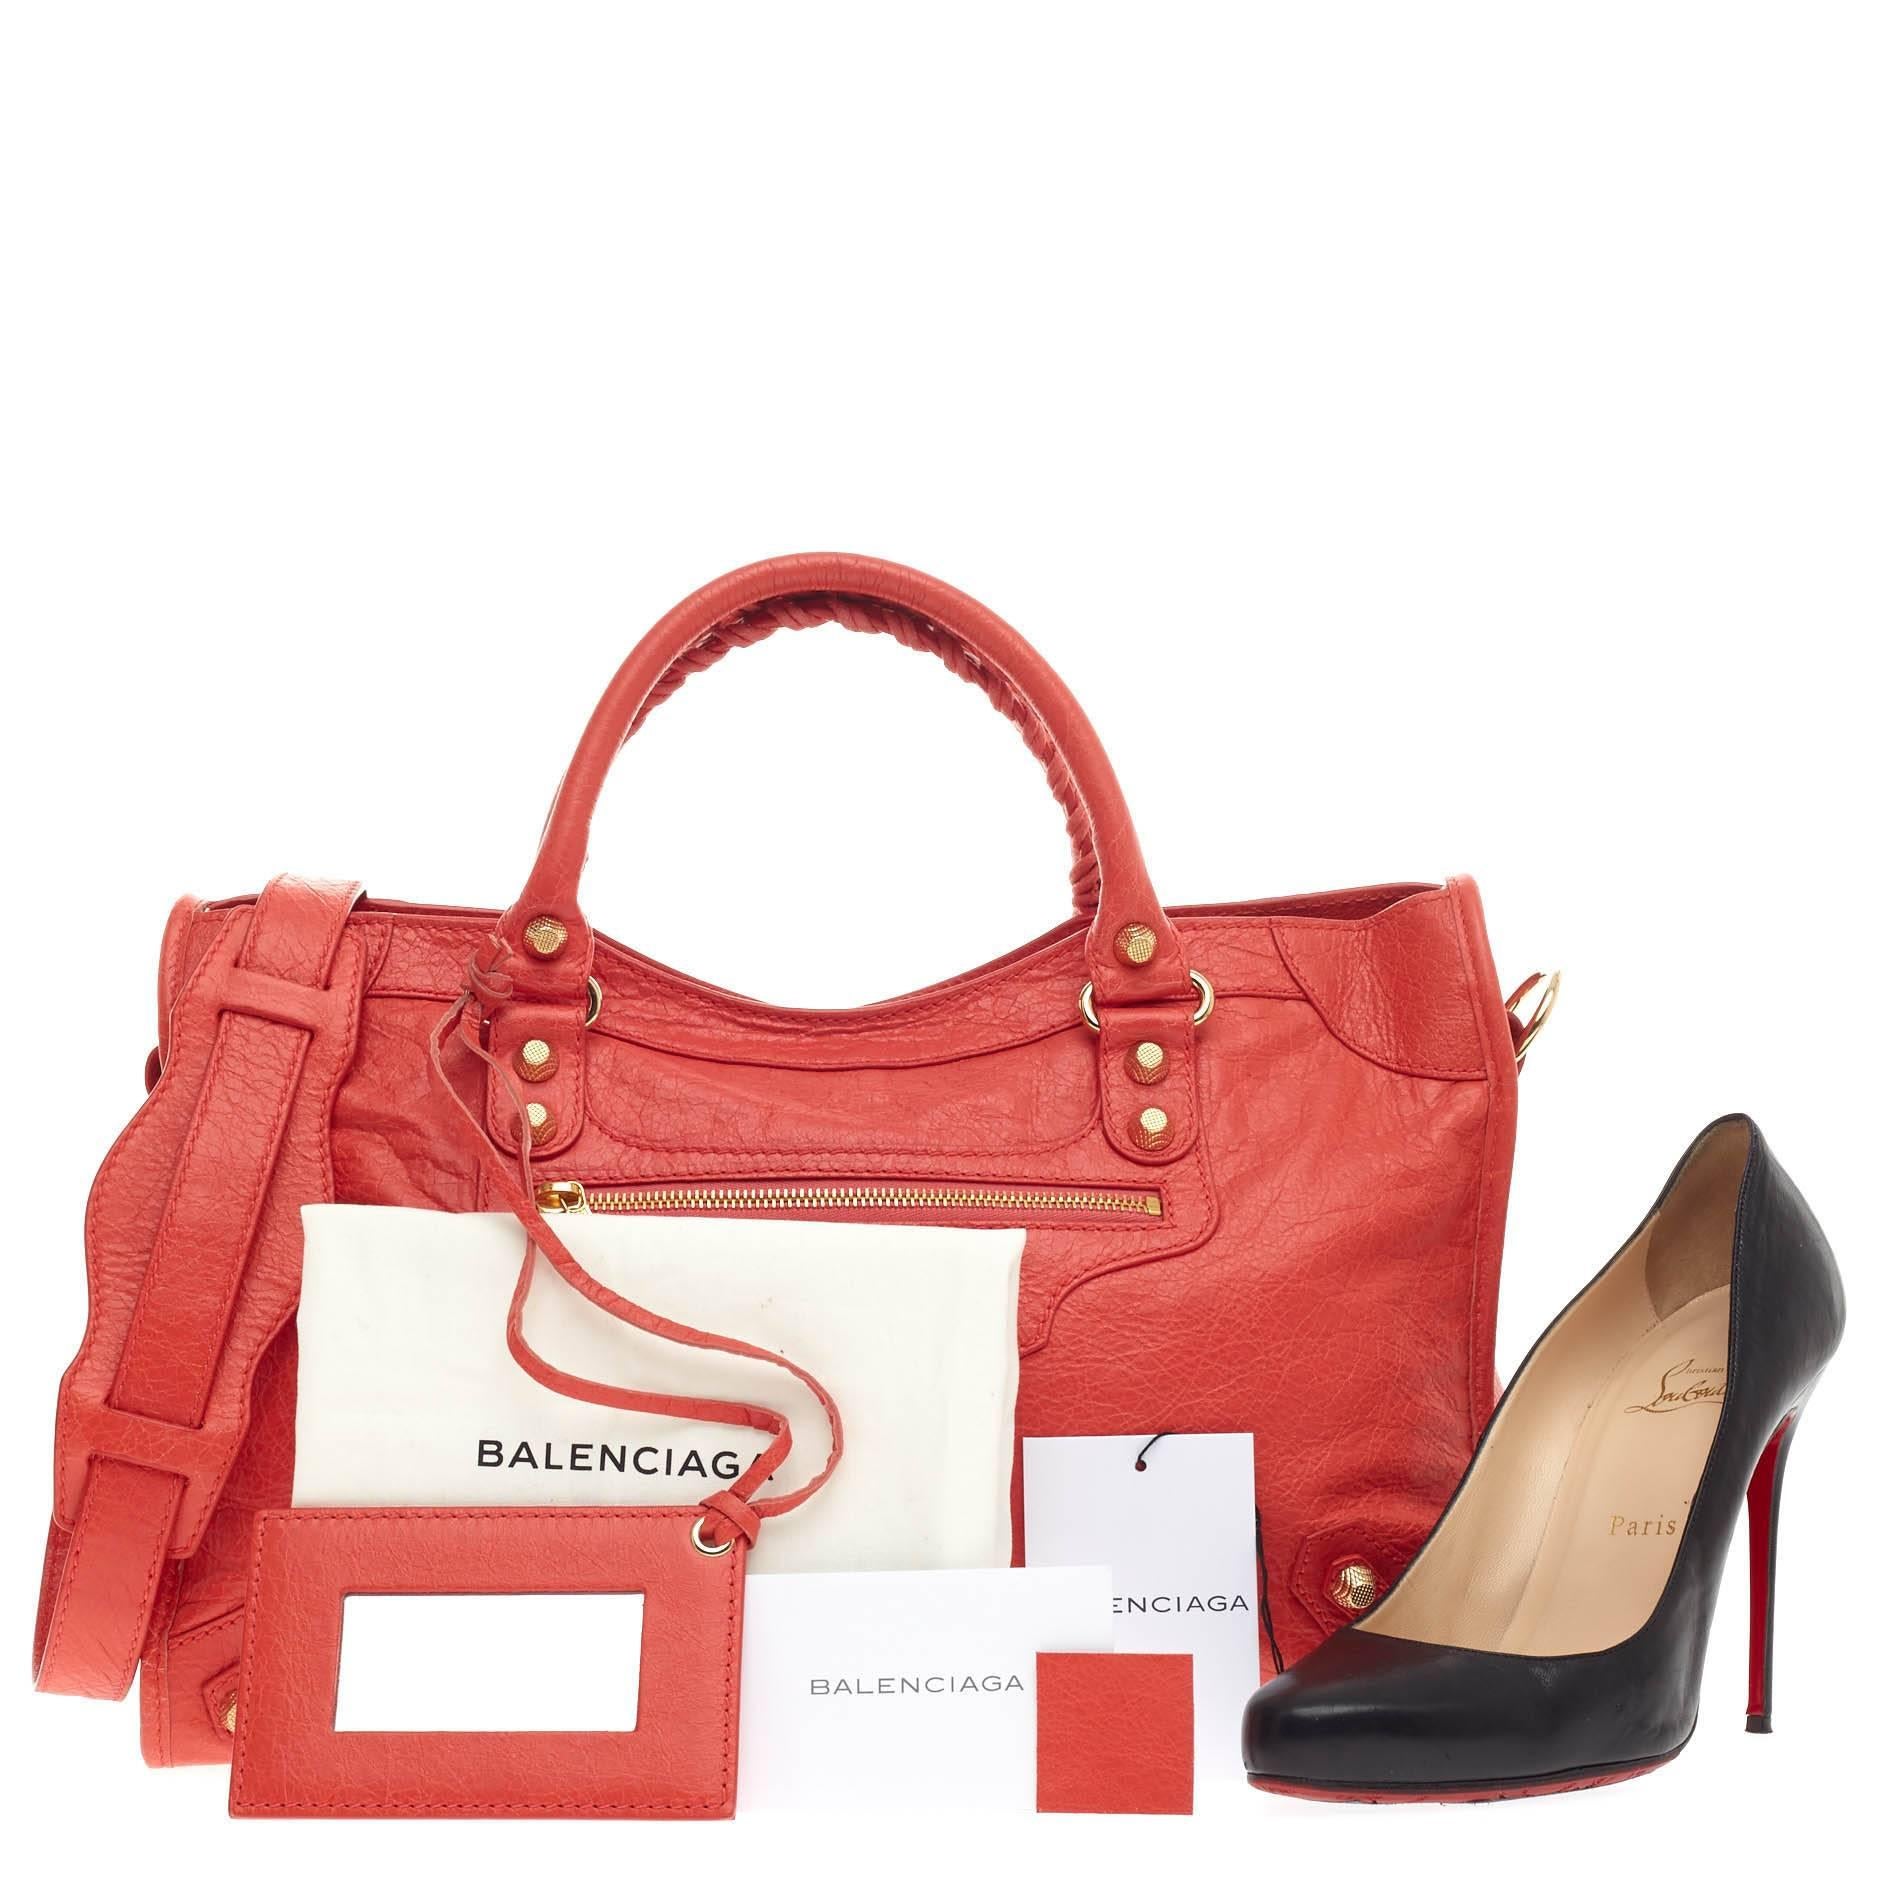 This authentic Balenciaga City Giant Studs Leather Medium is for the on-the-go fashionista. Constructed in beautiful rose corail distressed leather, this popular bag features braided woven handle straps, front zipper pocket, and iconic Balenciaga